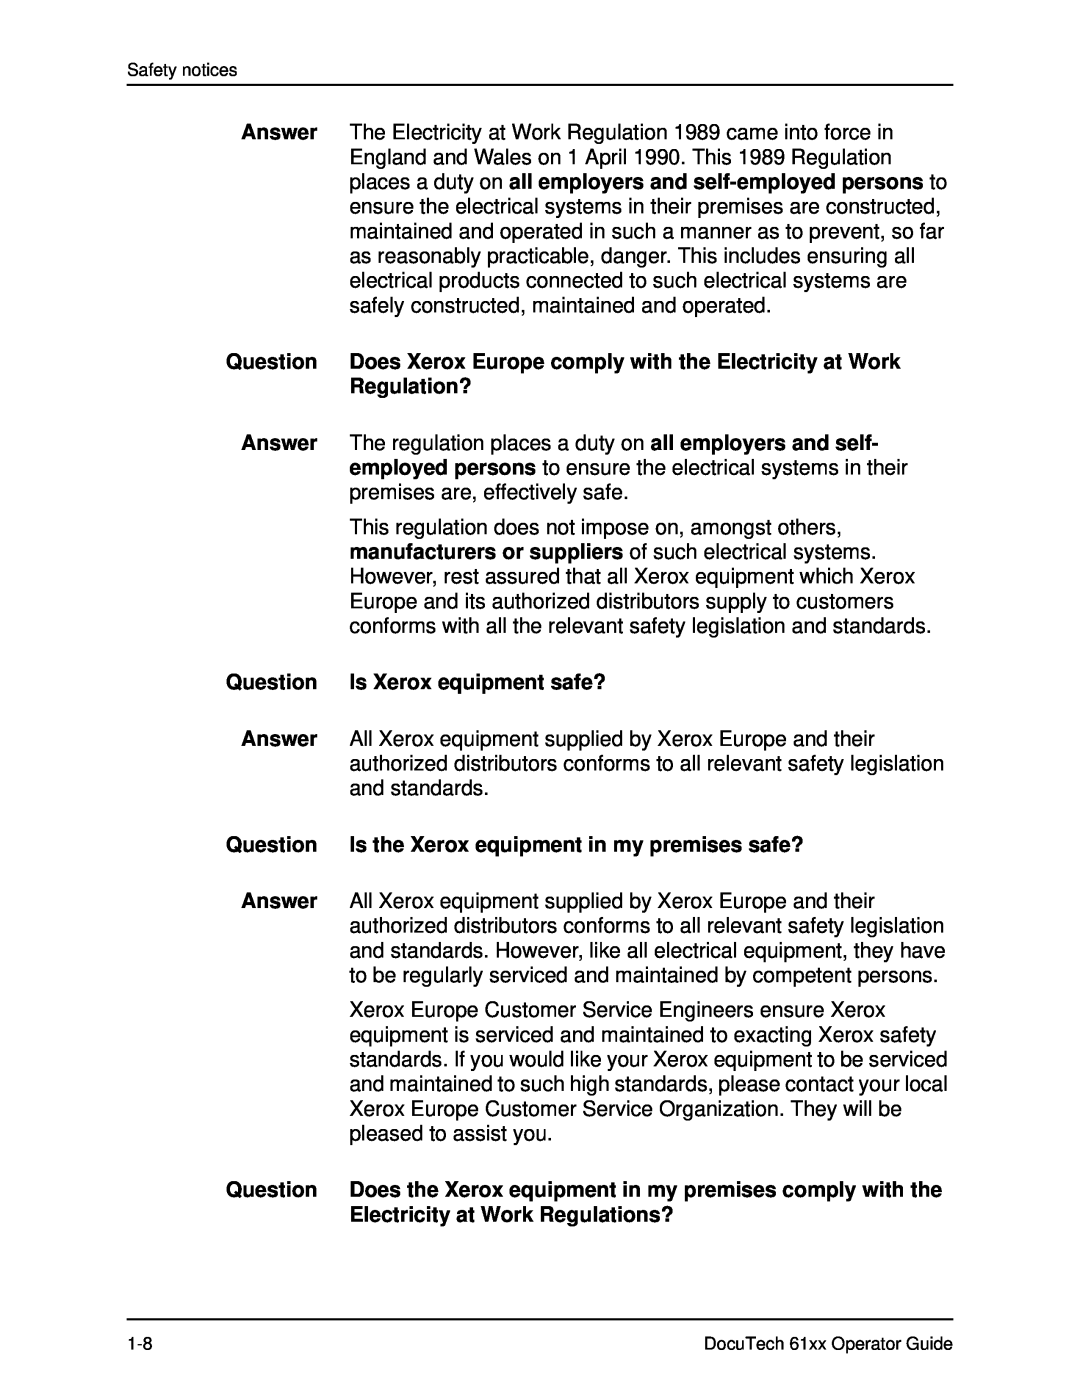 Xerox 61xx manual Answer, places a duty on all employers and self-employed persons to, Question, Regulation? 